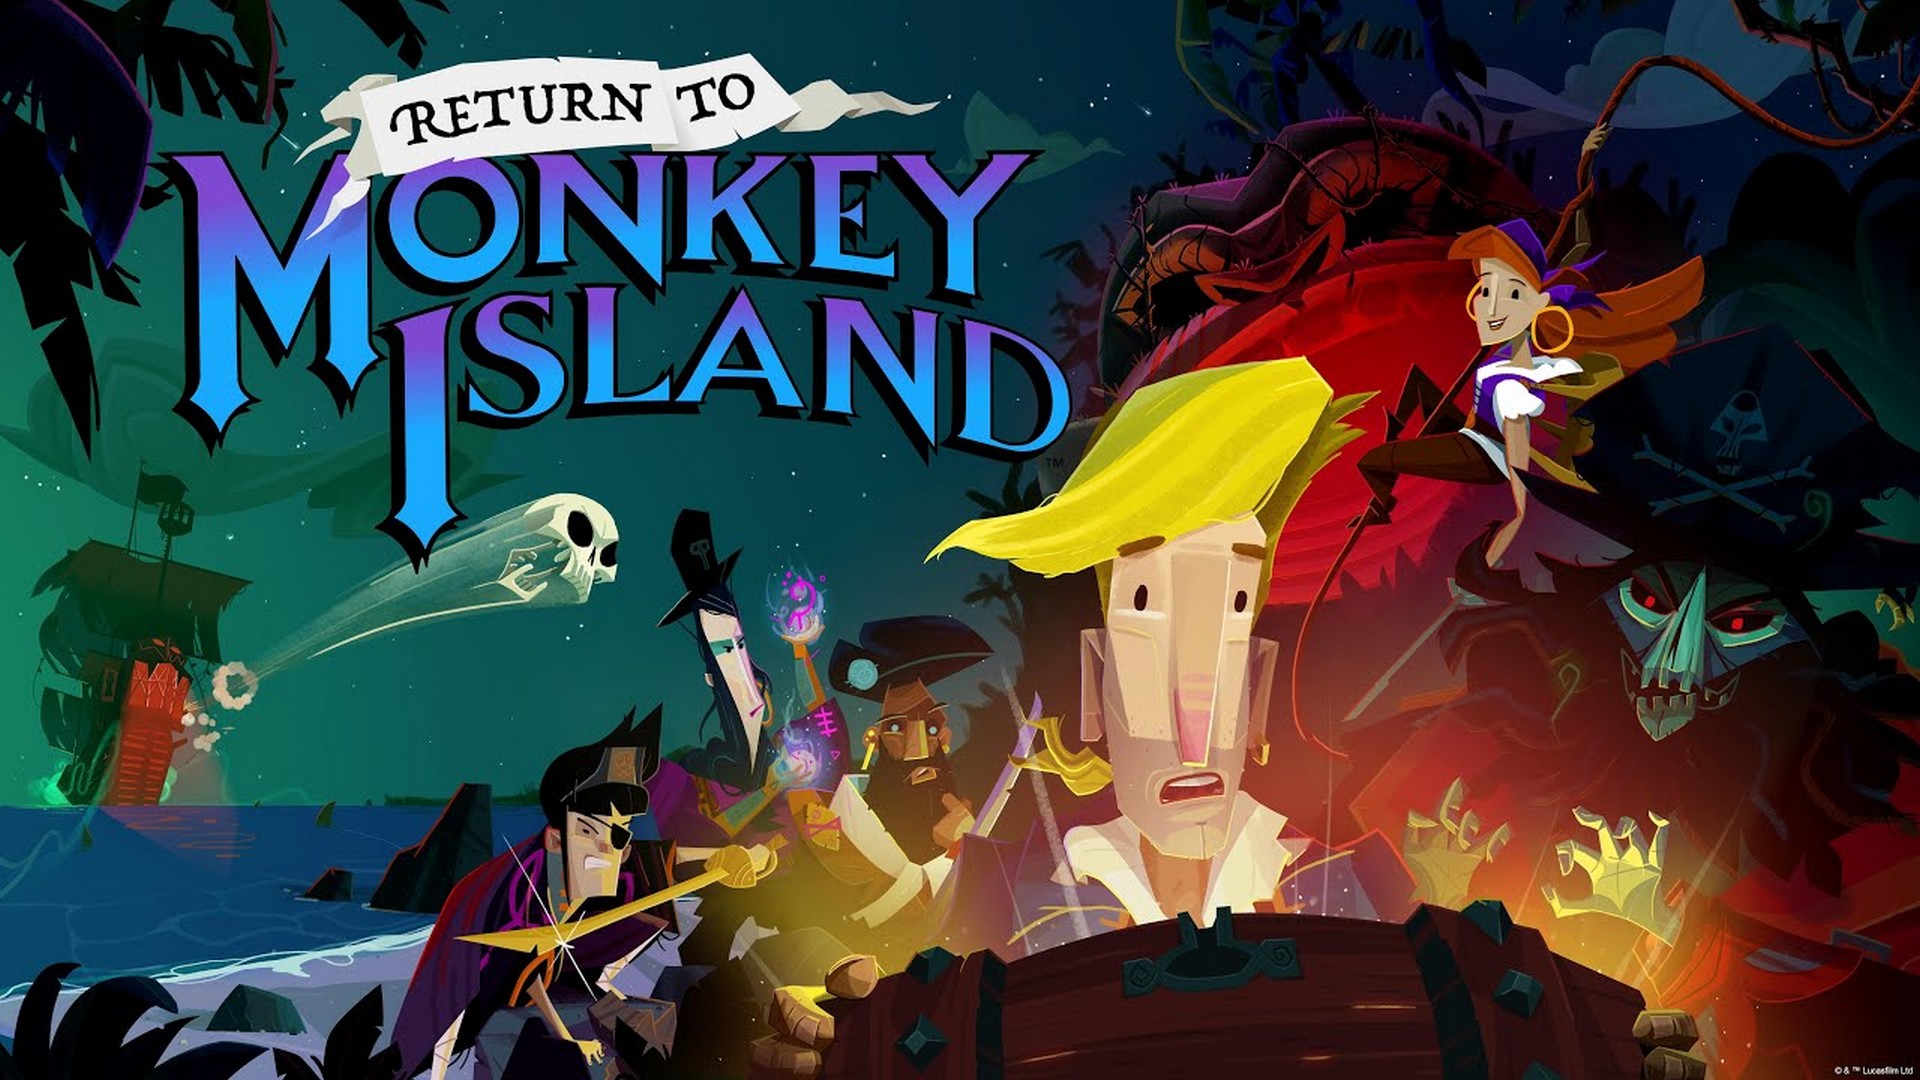 Return To Monkey Island Makes Its Way To Mobile On July 27